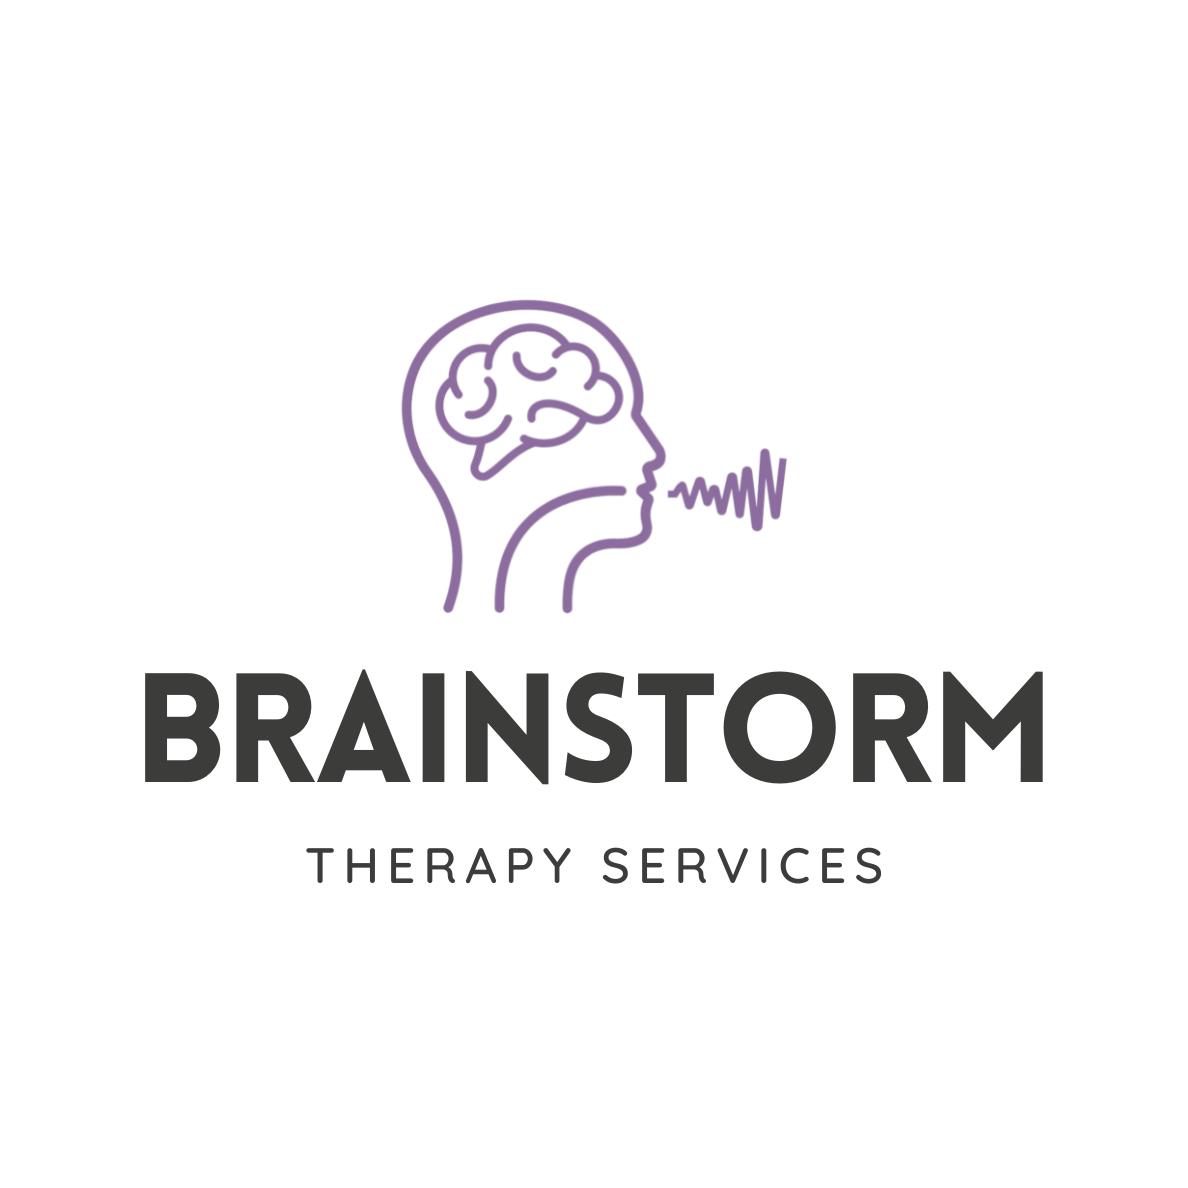 Brainstorm Therapy Services Logo